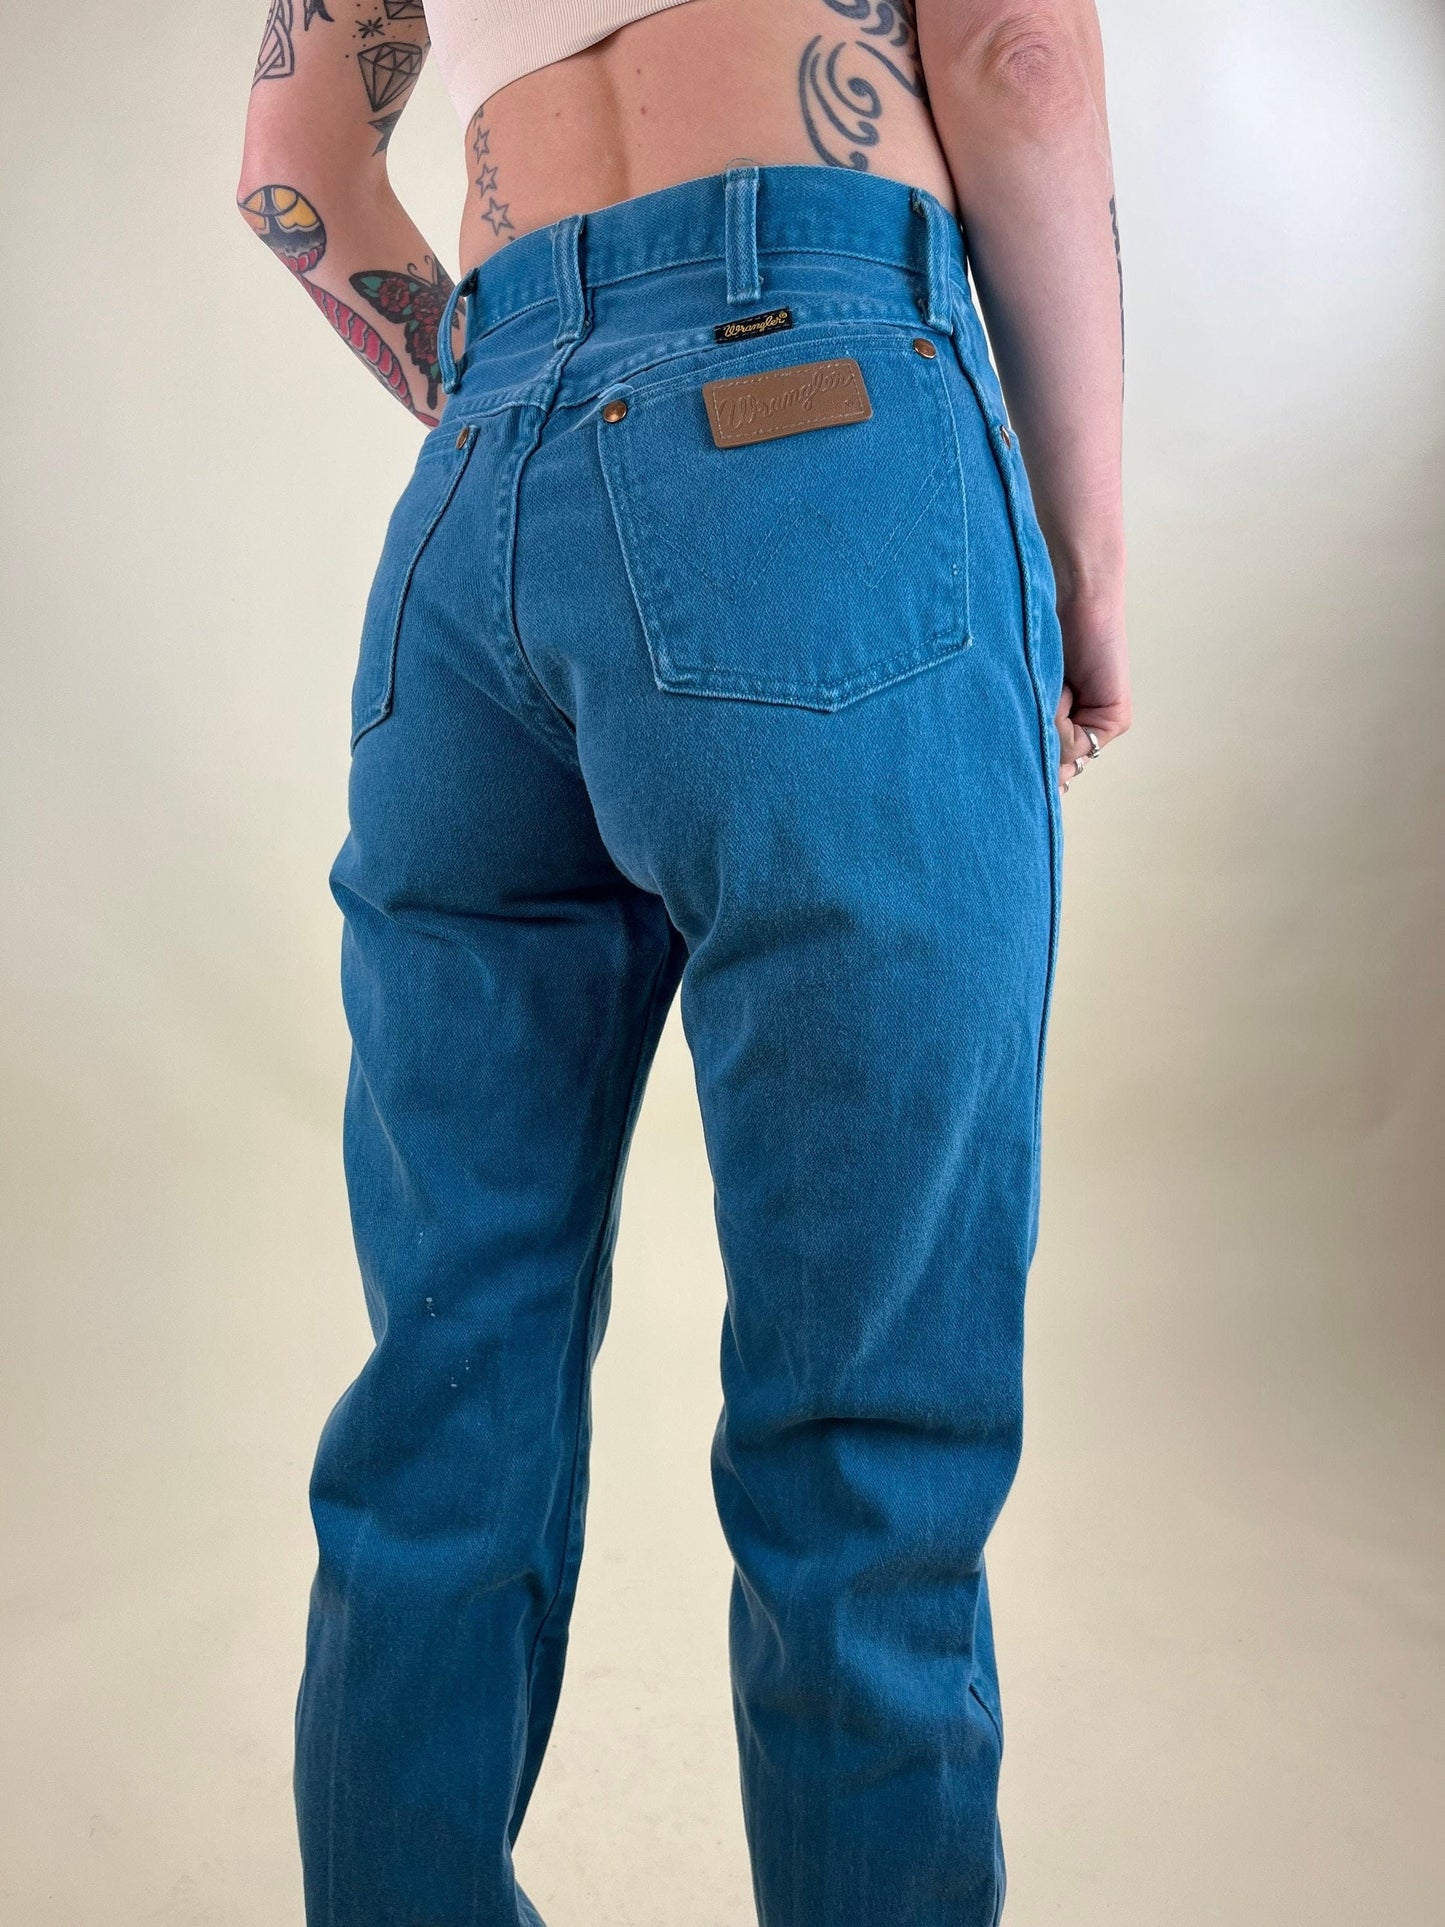 70s Wrangler Teal Blue Jeans / Made in USA / 26